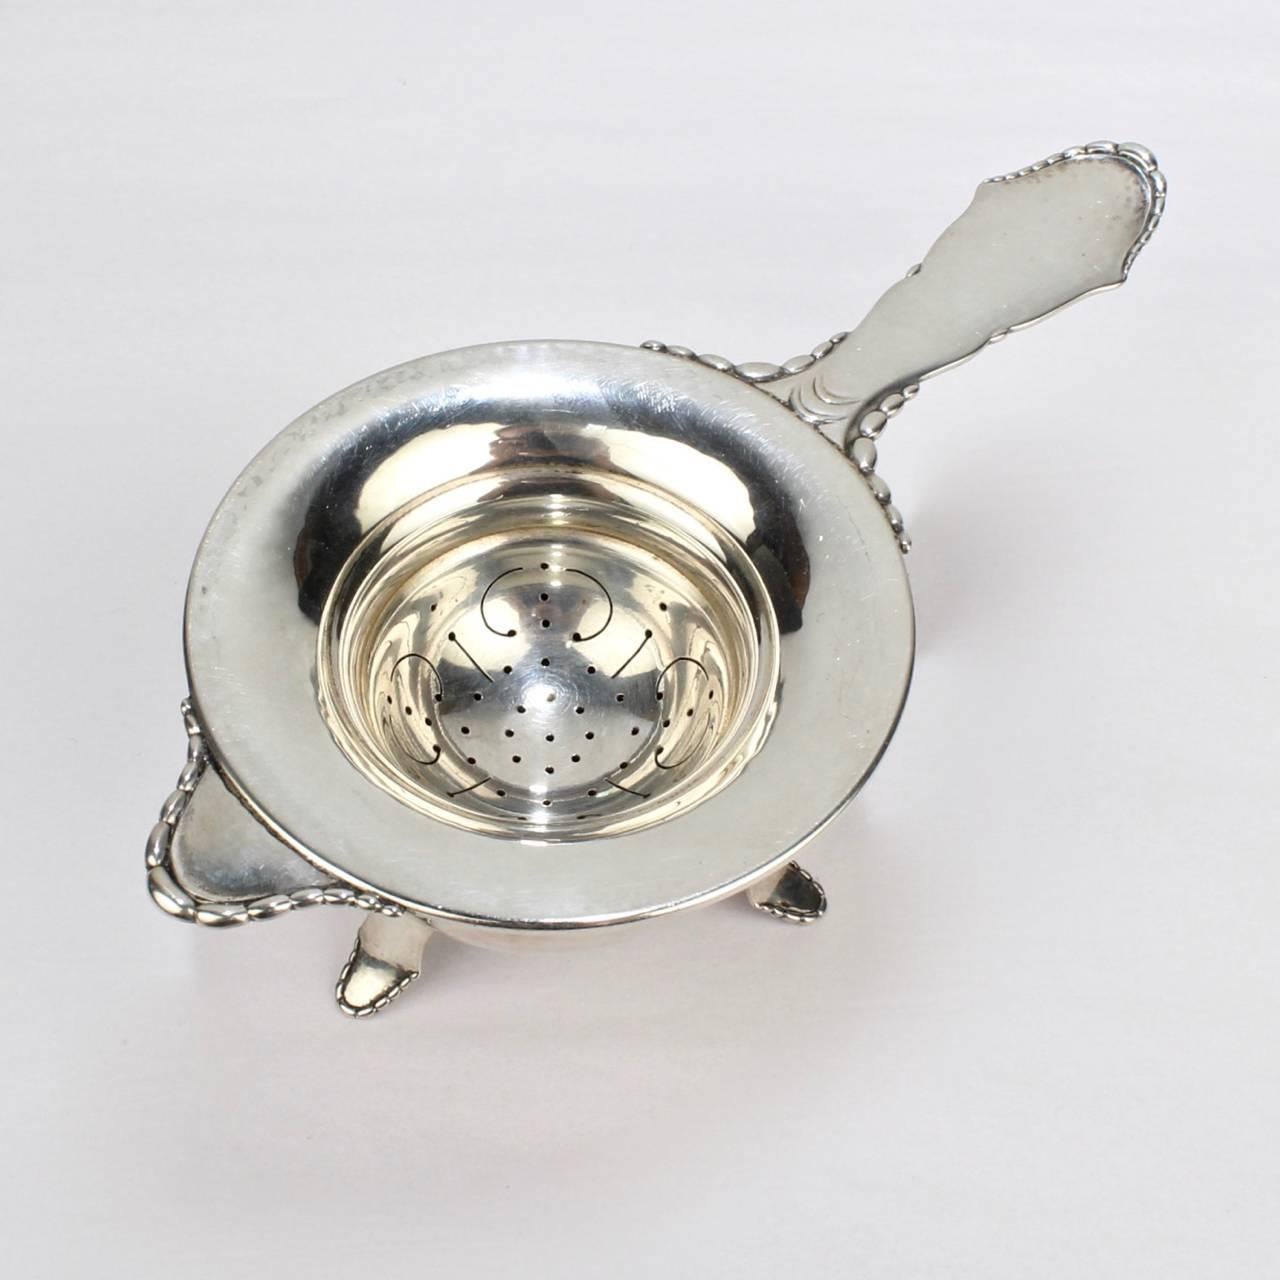 A fine Art Deco period Danish hand-hammered sterling silver tea strainer and Stand.

The design is typically Danish with a beaded edge, visible Hammer marks, and a hint of Georg Jensen style.

Made by the noted Grann and Laglye silversmiths in